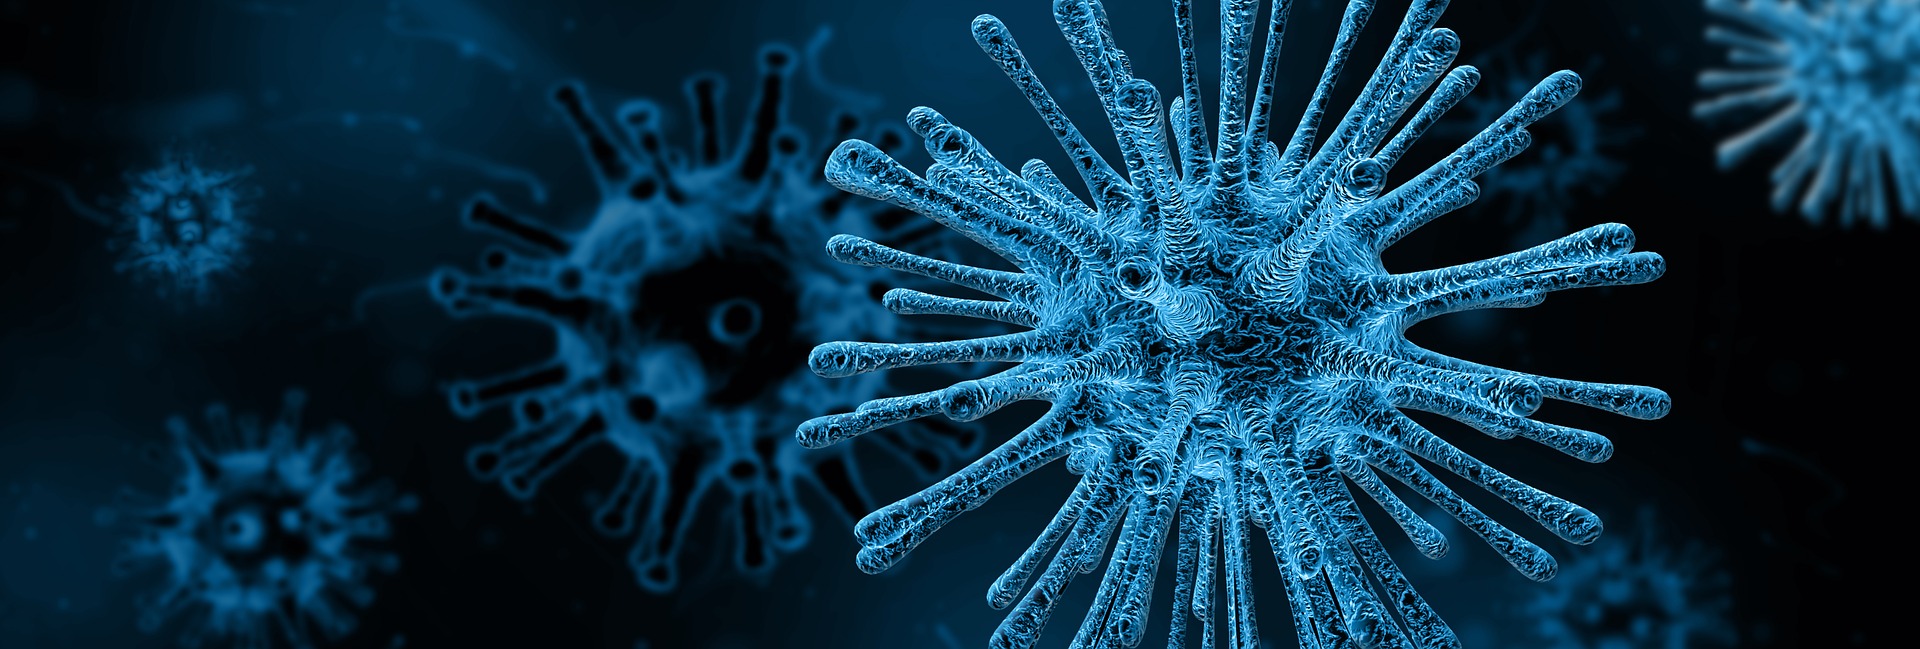 Combating coronavirus – Keeping your car clean and germ-free